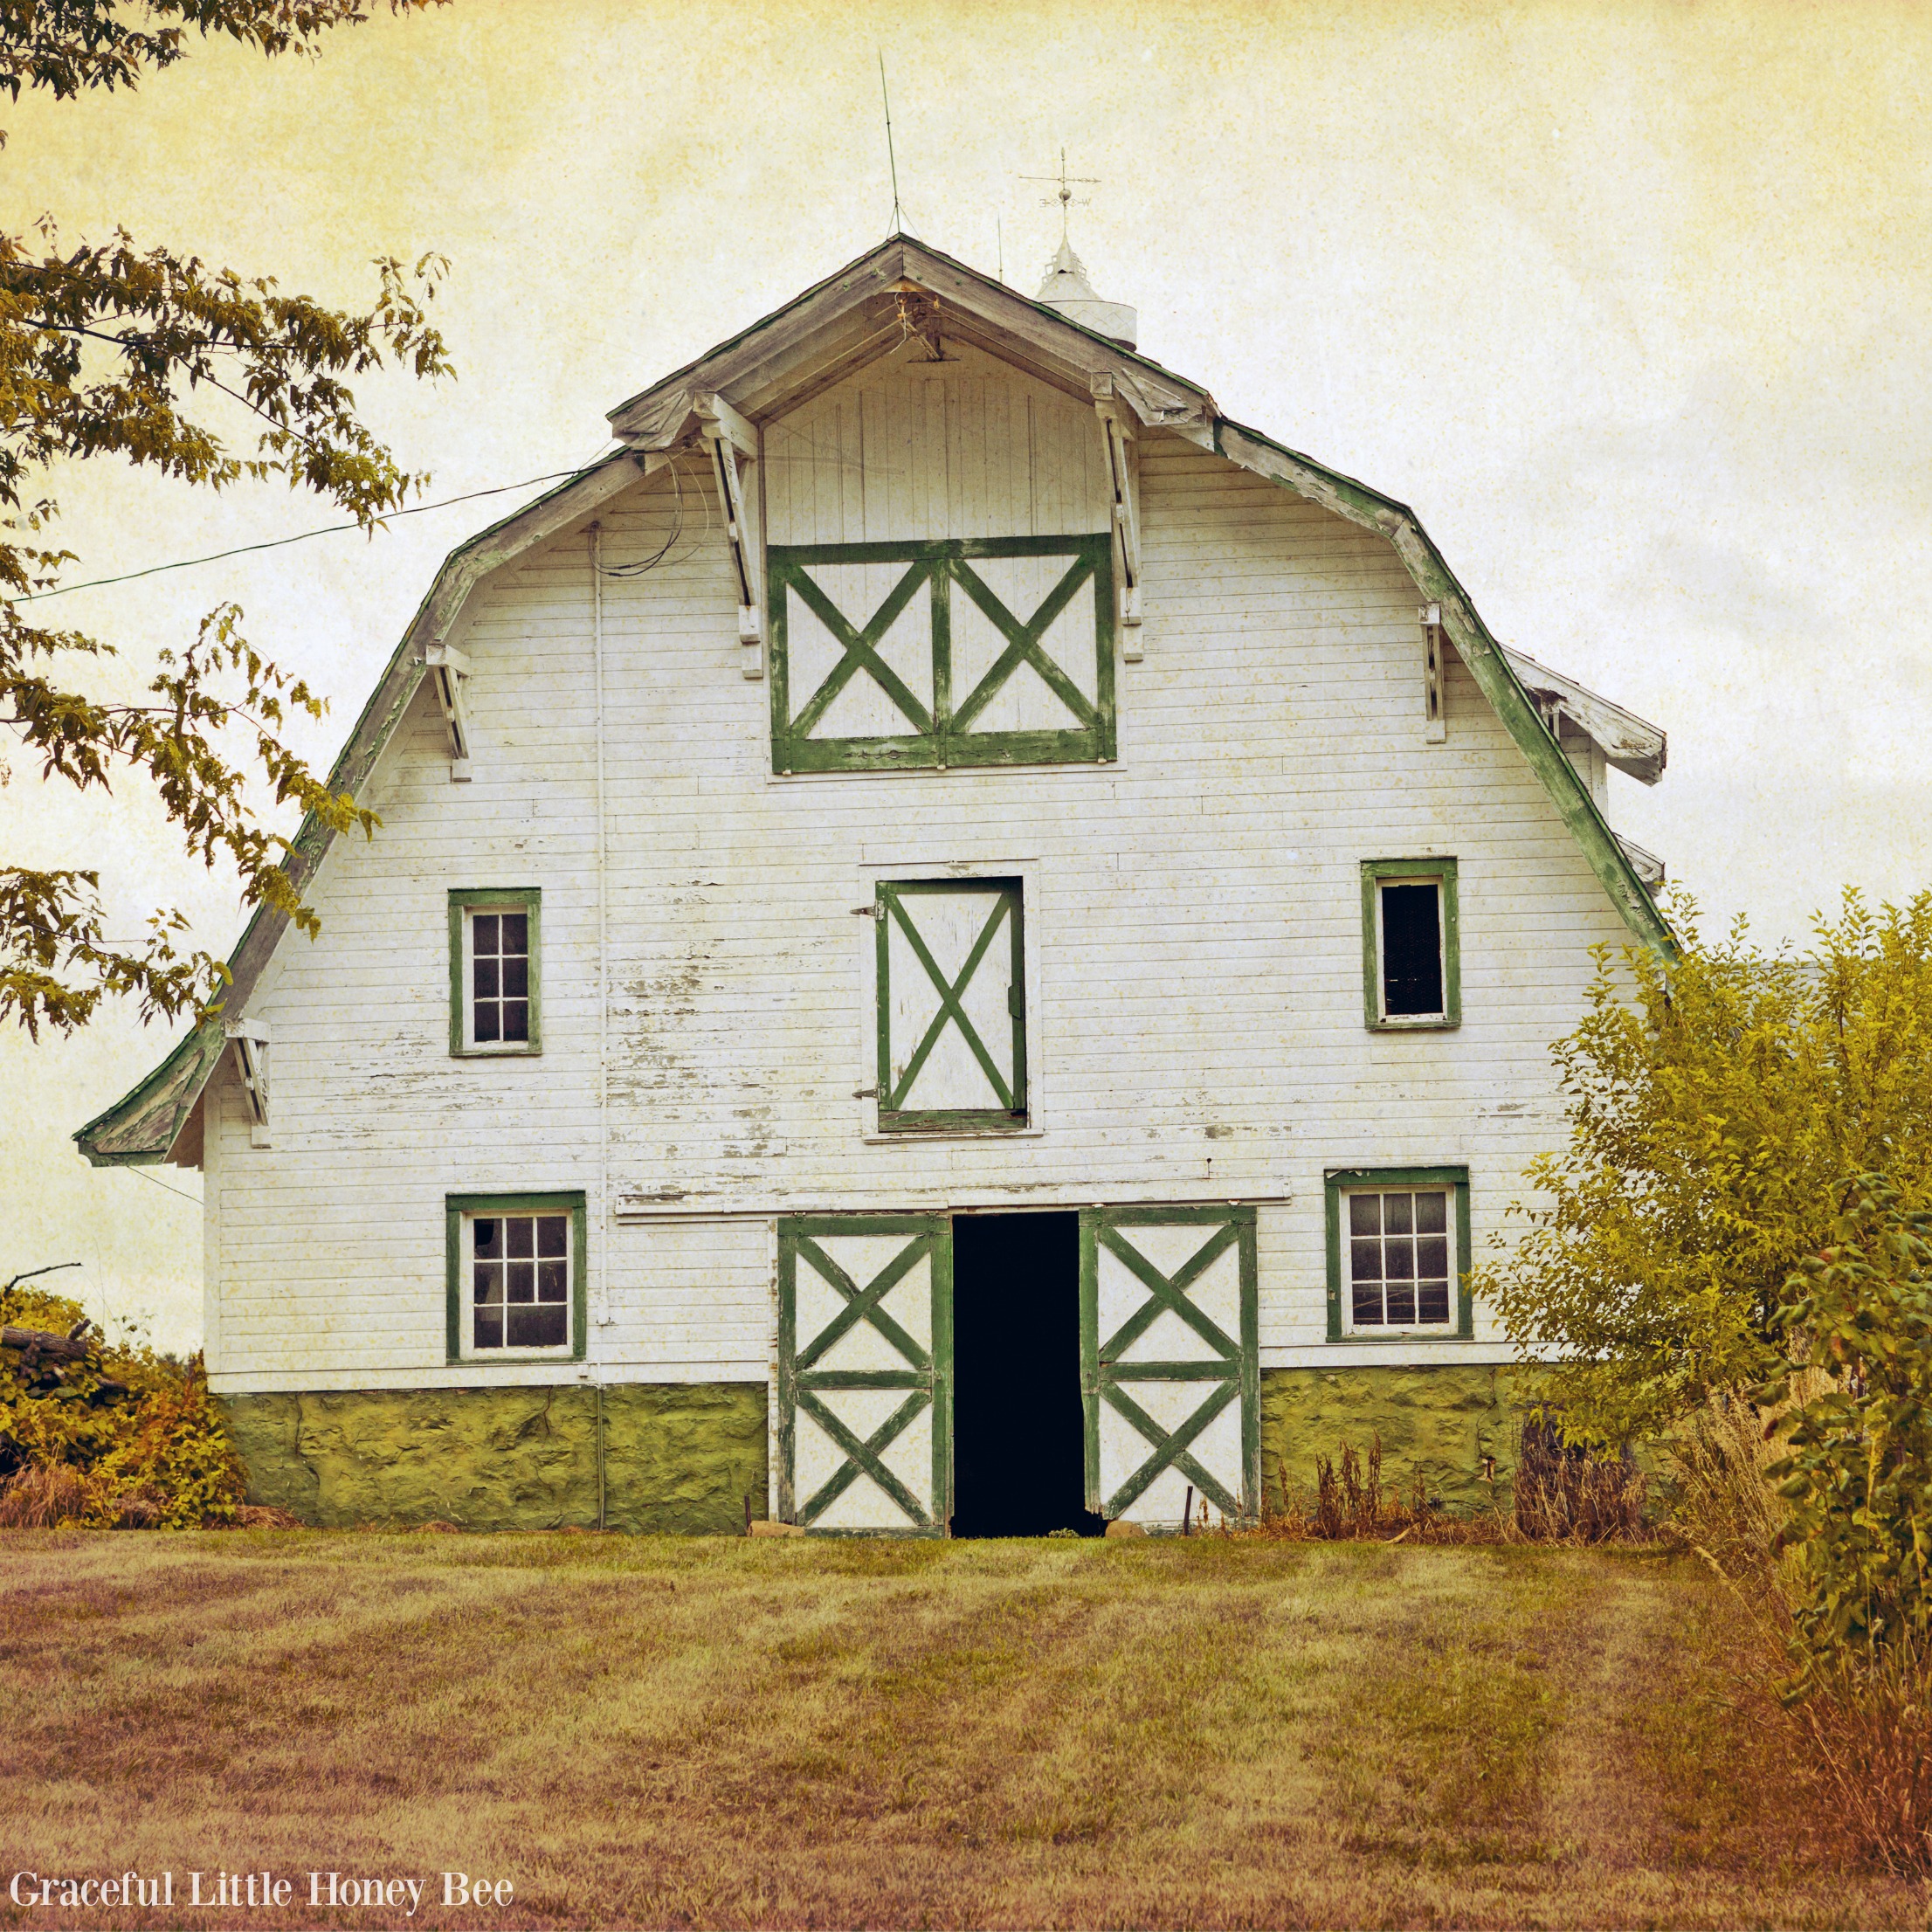 Old white barn with green trim in a field.